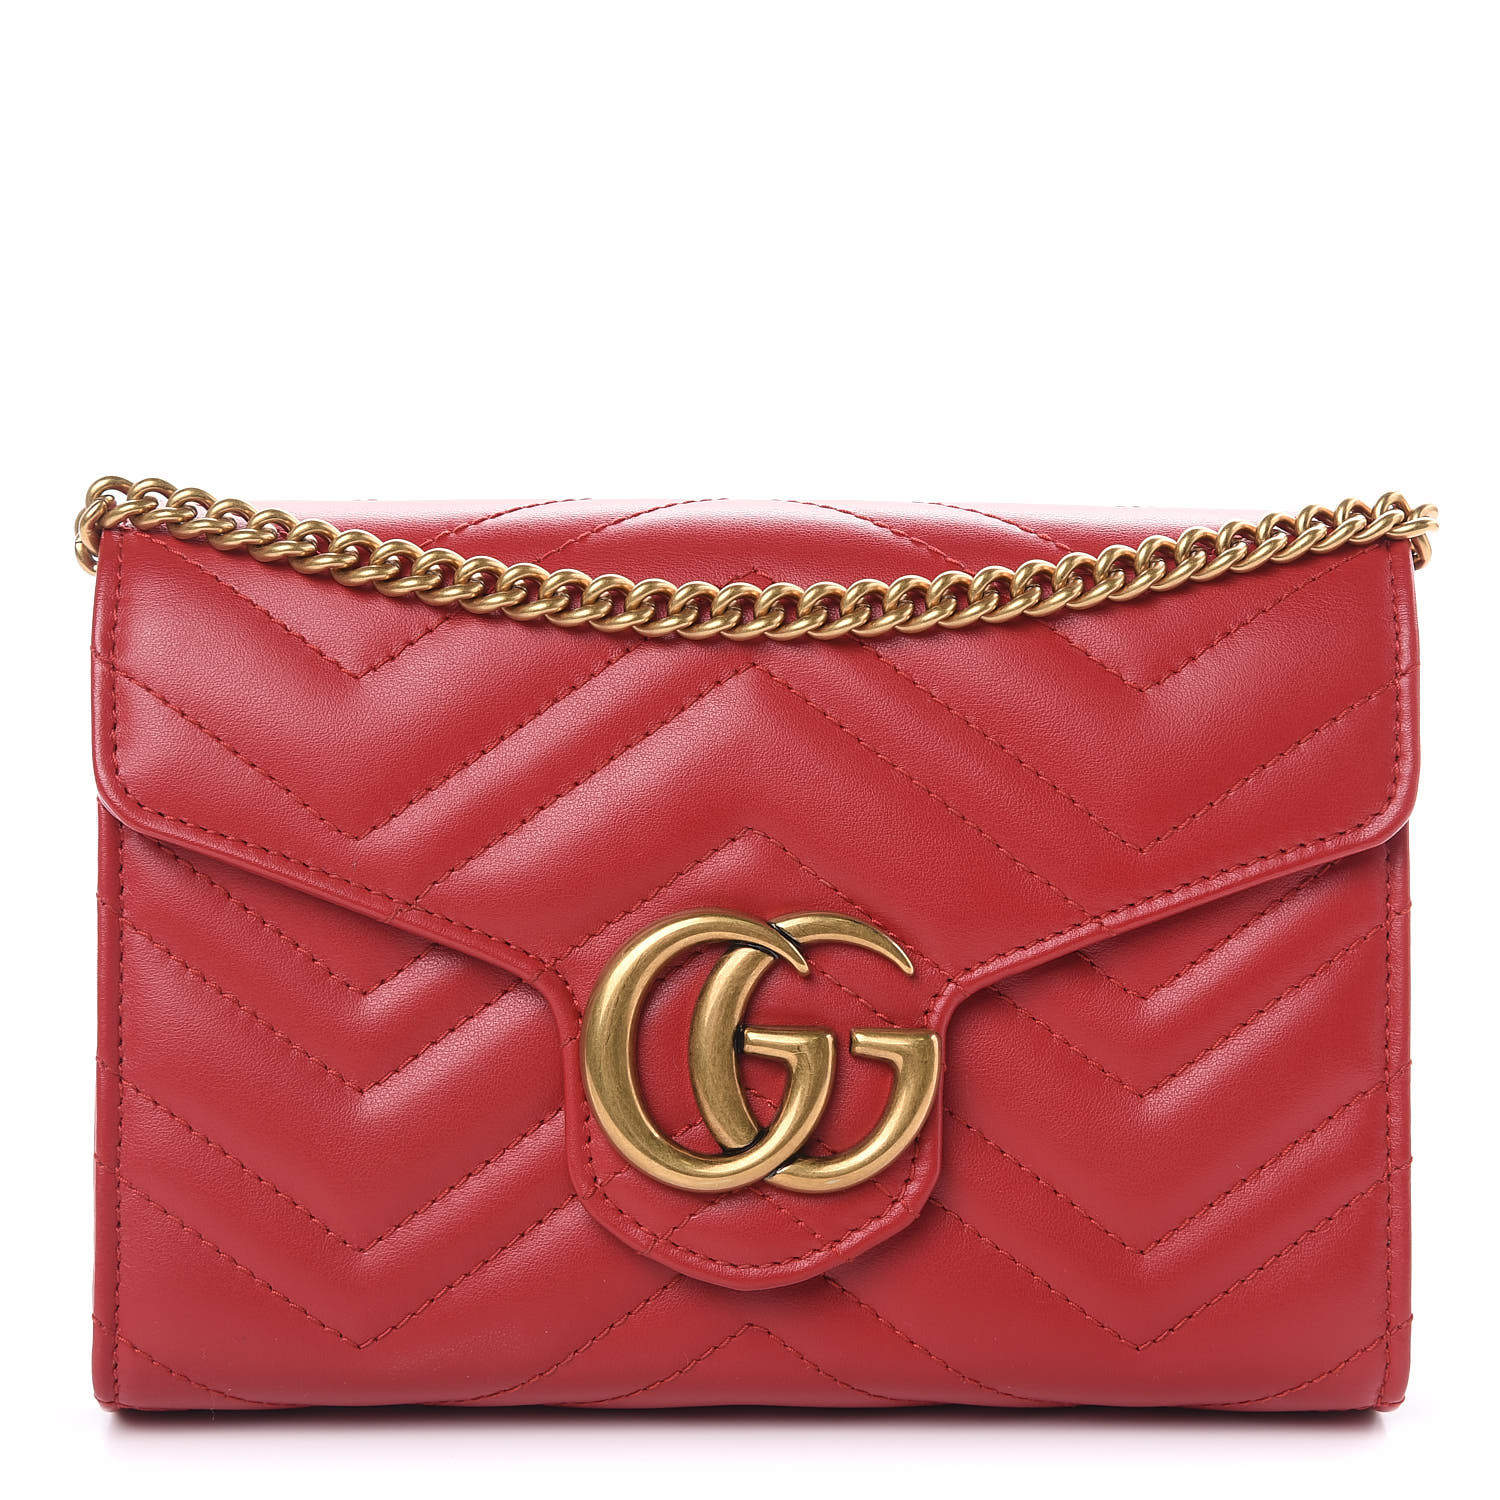 GUCCI Calfskin Matelasse GG Marmont Chain Wallet Red 457857